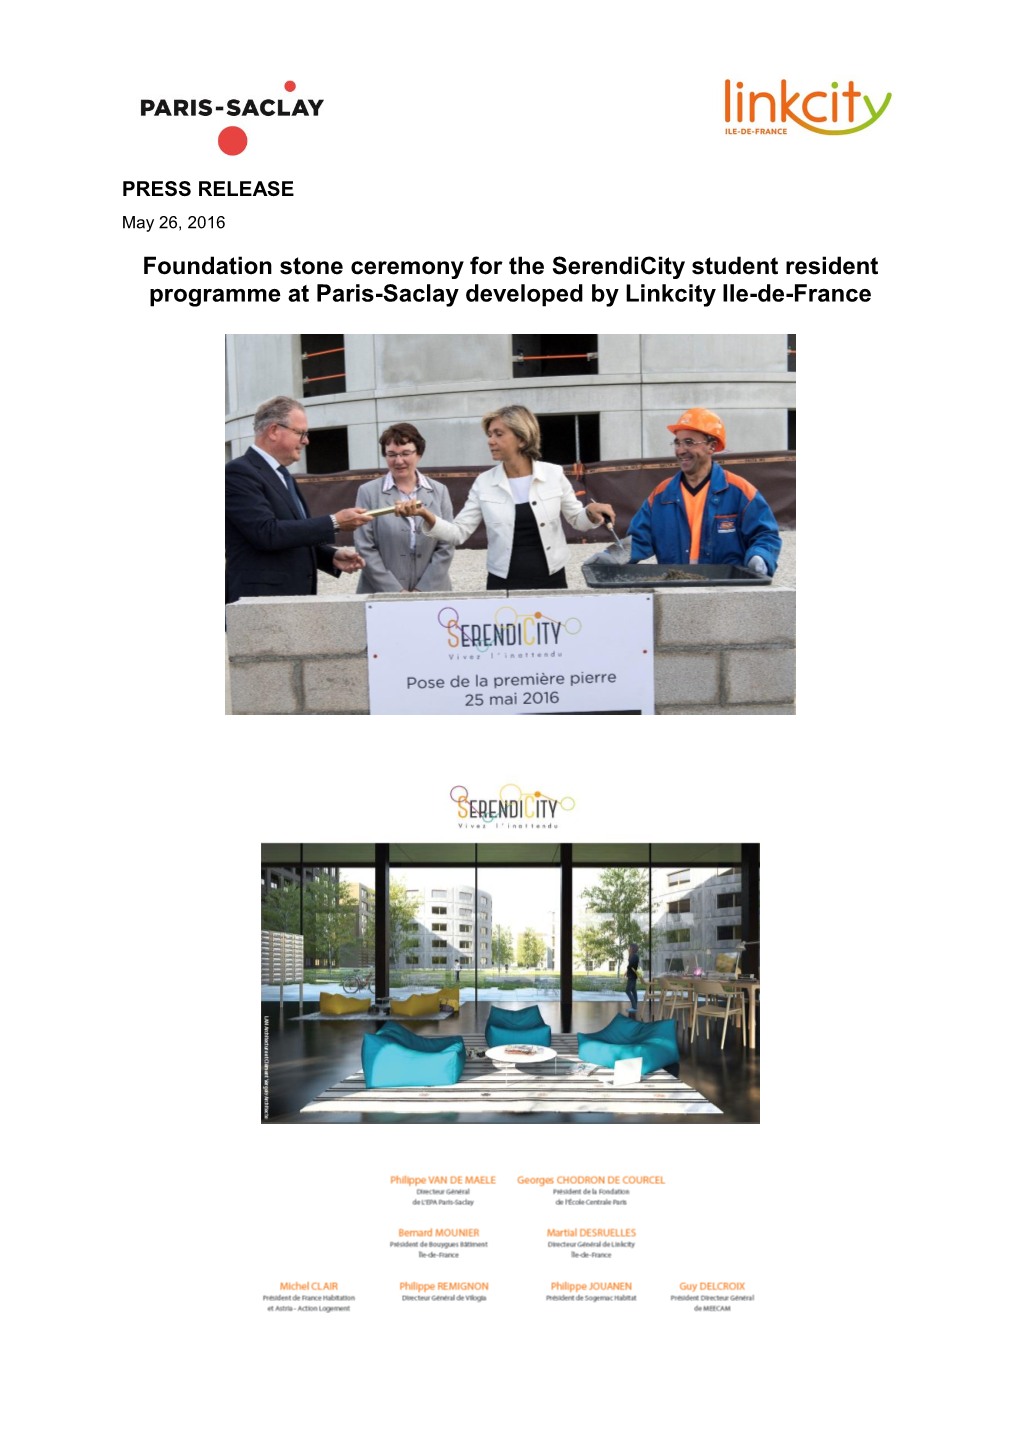 Foundation Stone Ceremony for the Serendicity Student Resident Programme at Paris-Saclay Developed by Linkcity Ile-De-France